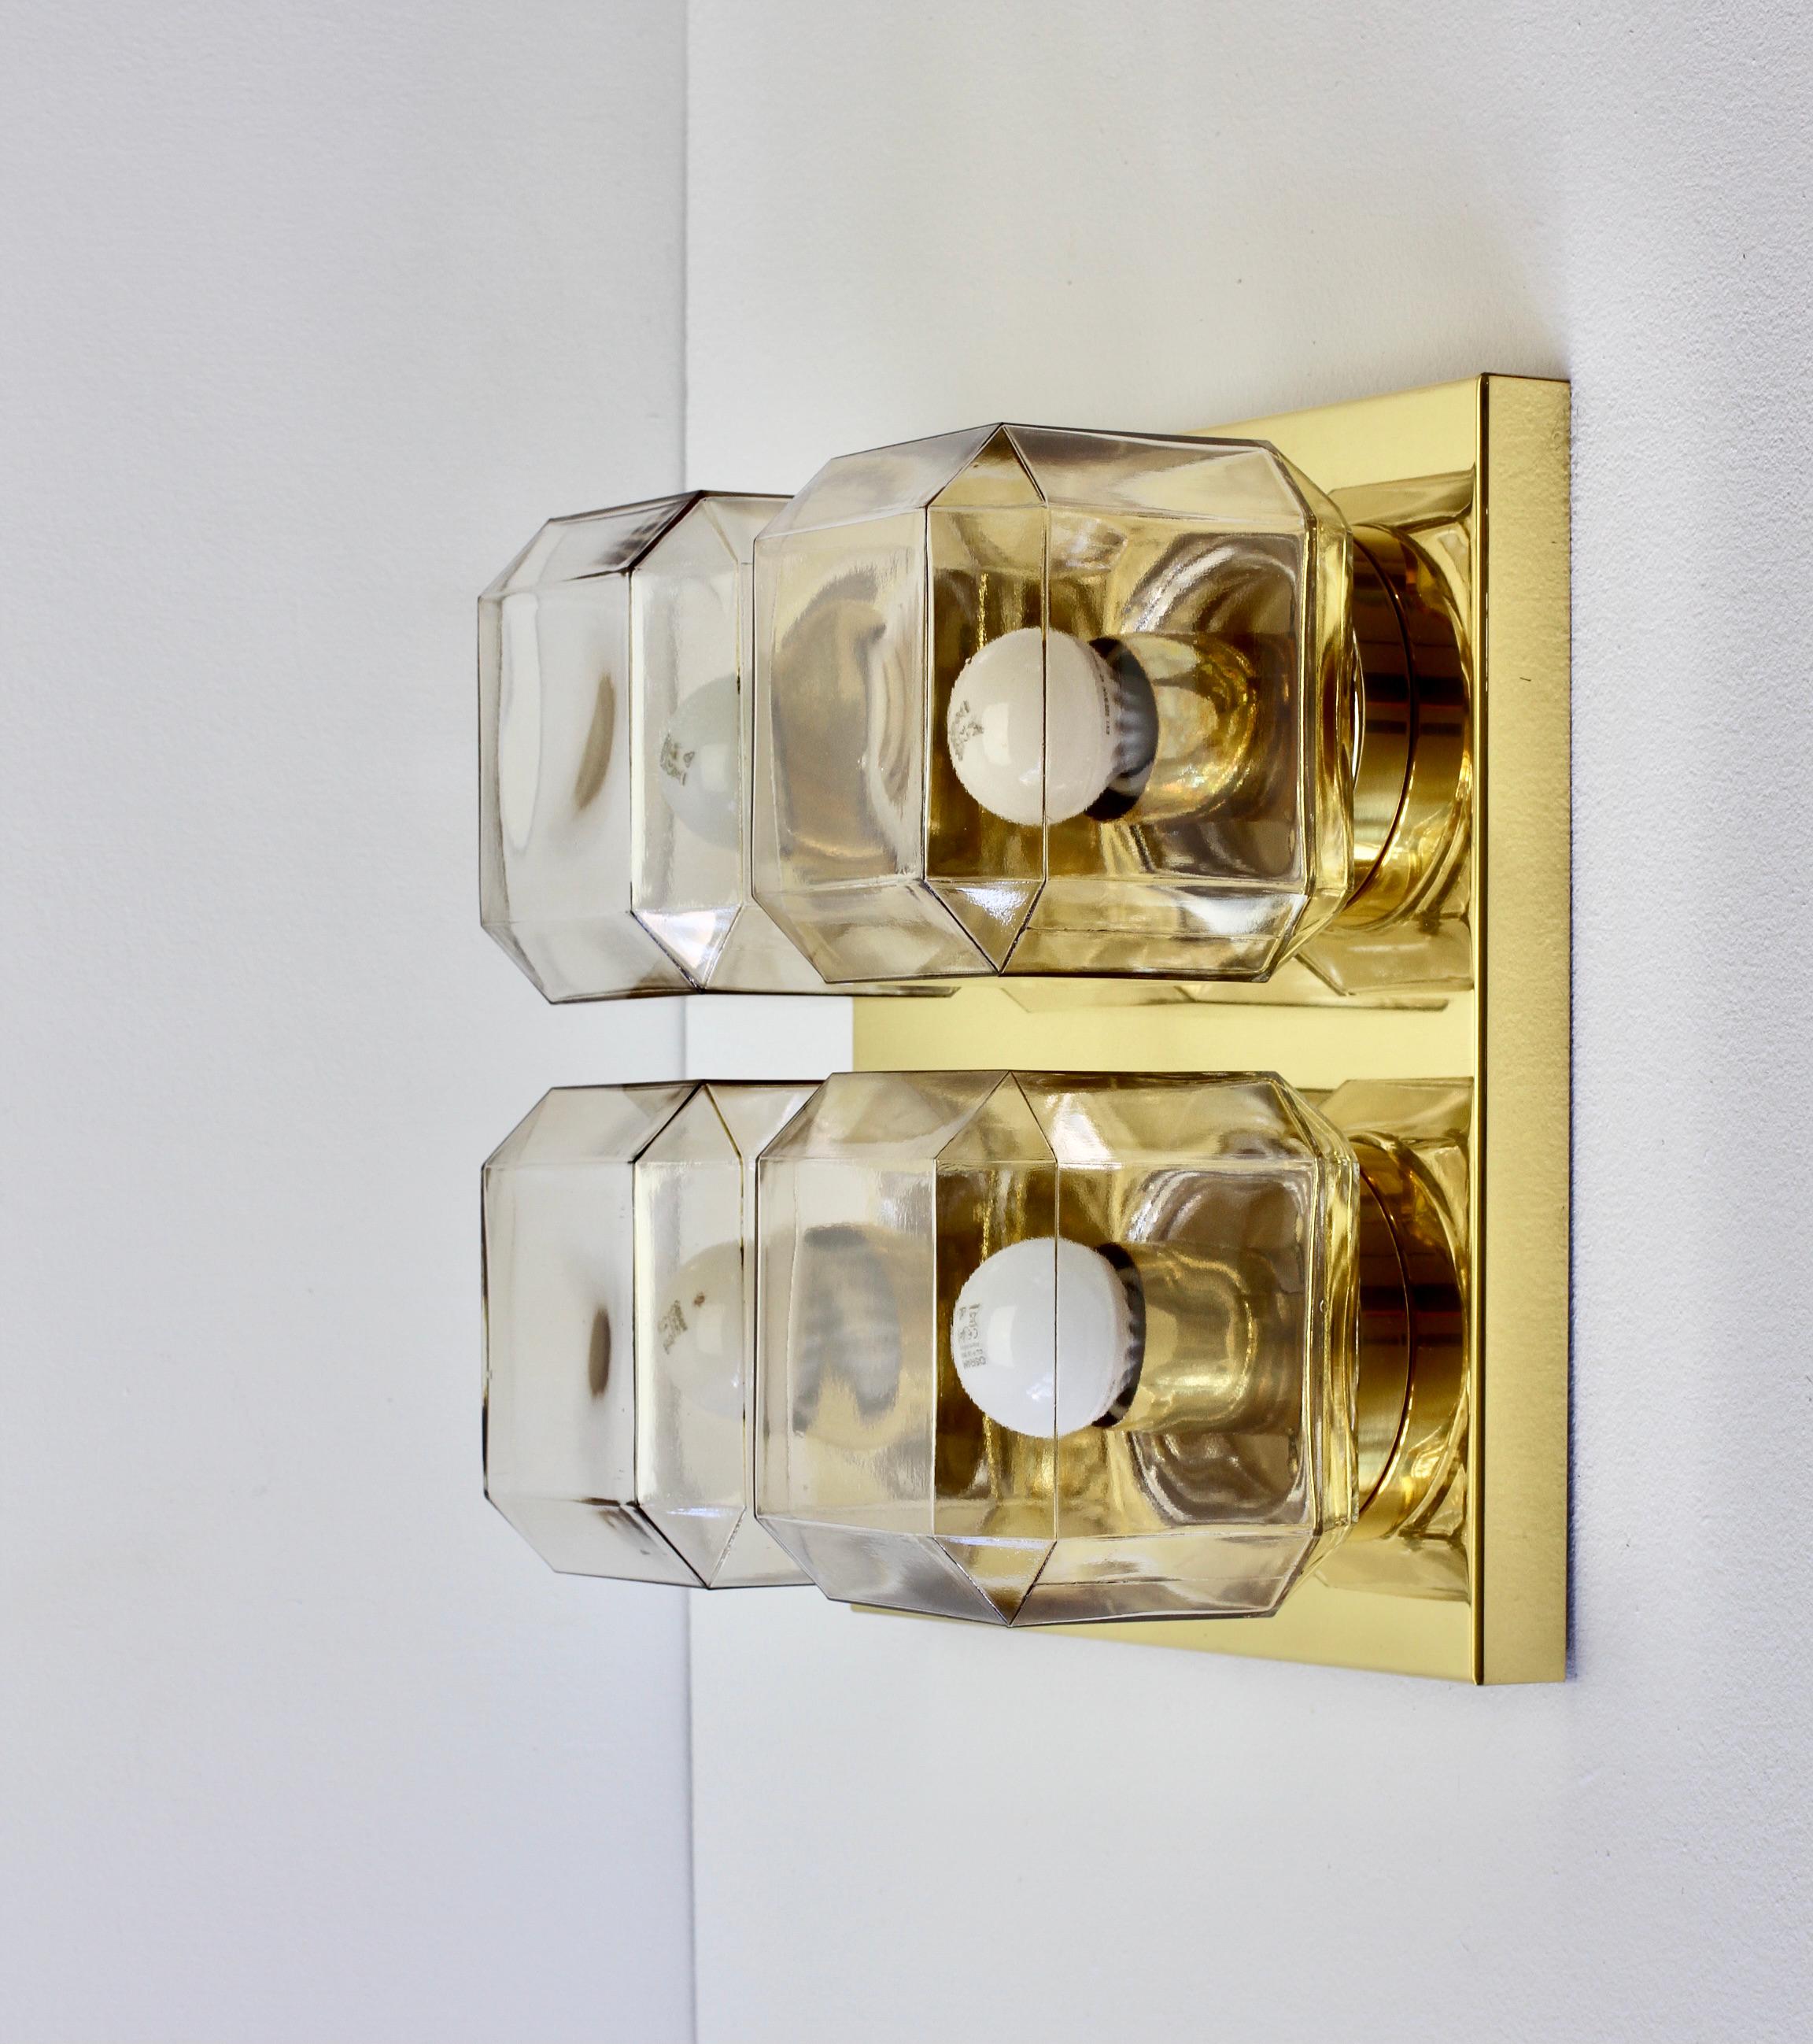 One of two pairs of large vintage Industrial style ceiling flush mount light by Glashütte Limburg, circa 1975-1985. Featuring 4 square geometric shaped mouth blown glass elements with a champagne tone & mounted on a polished brass base or mount.